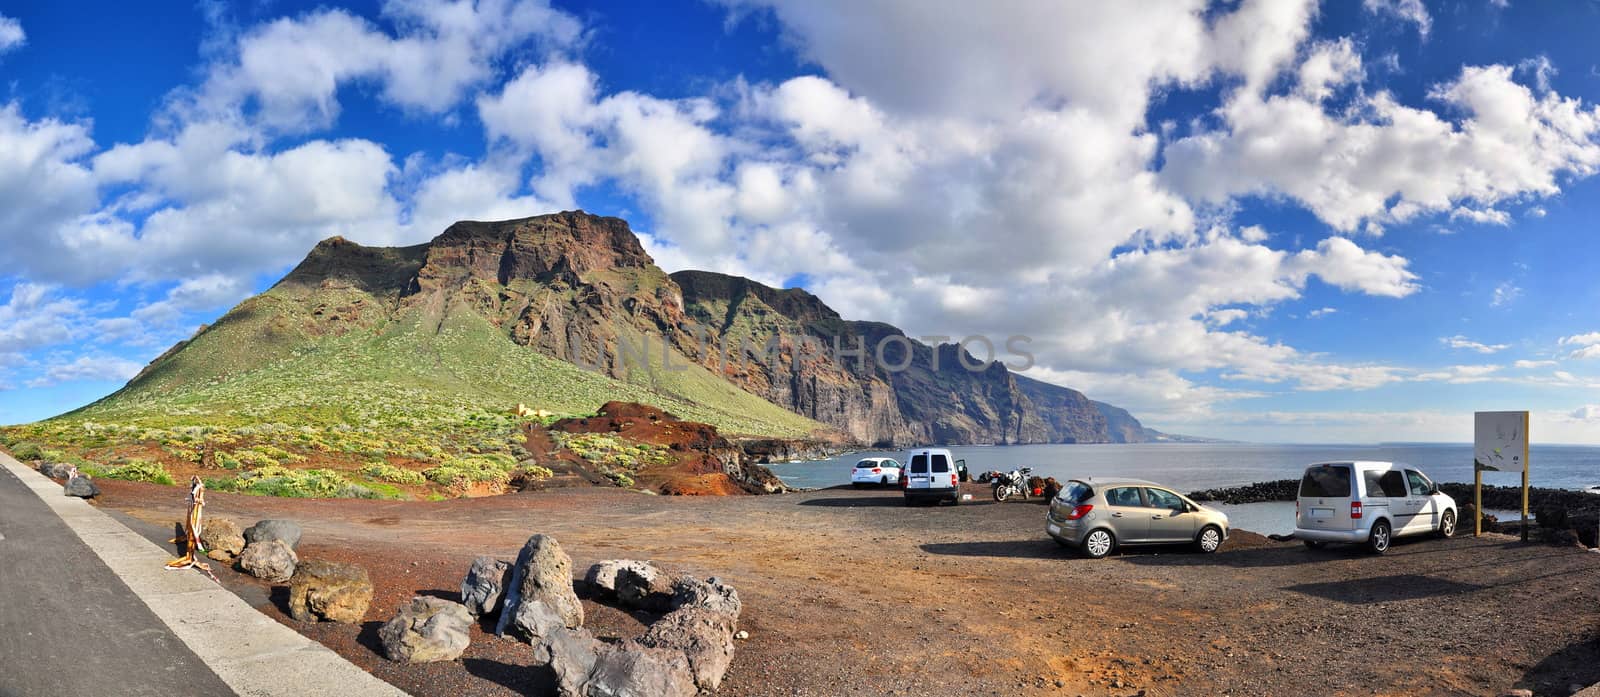 Coast with rocky mountains, Panorama, Tenerife, Canarian Islands by Eagle2308